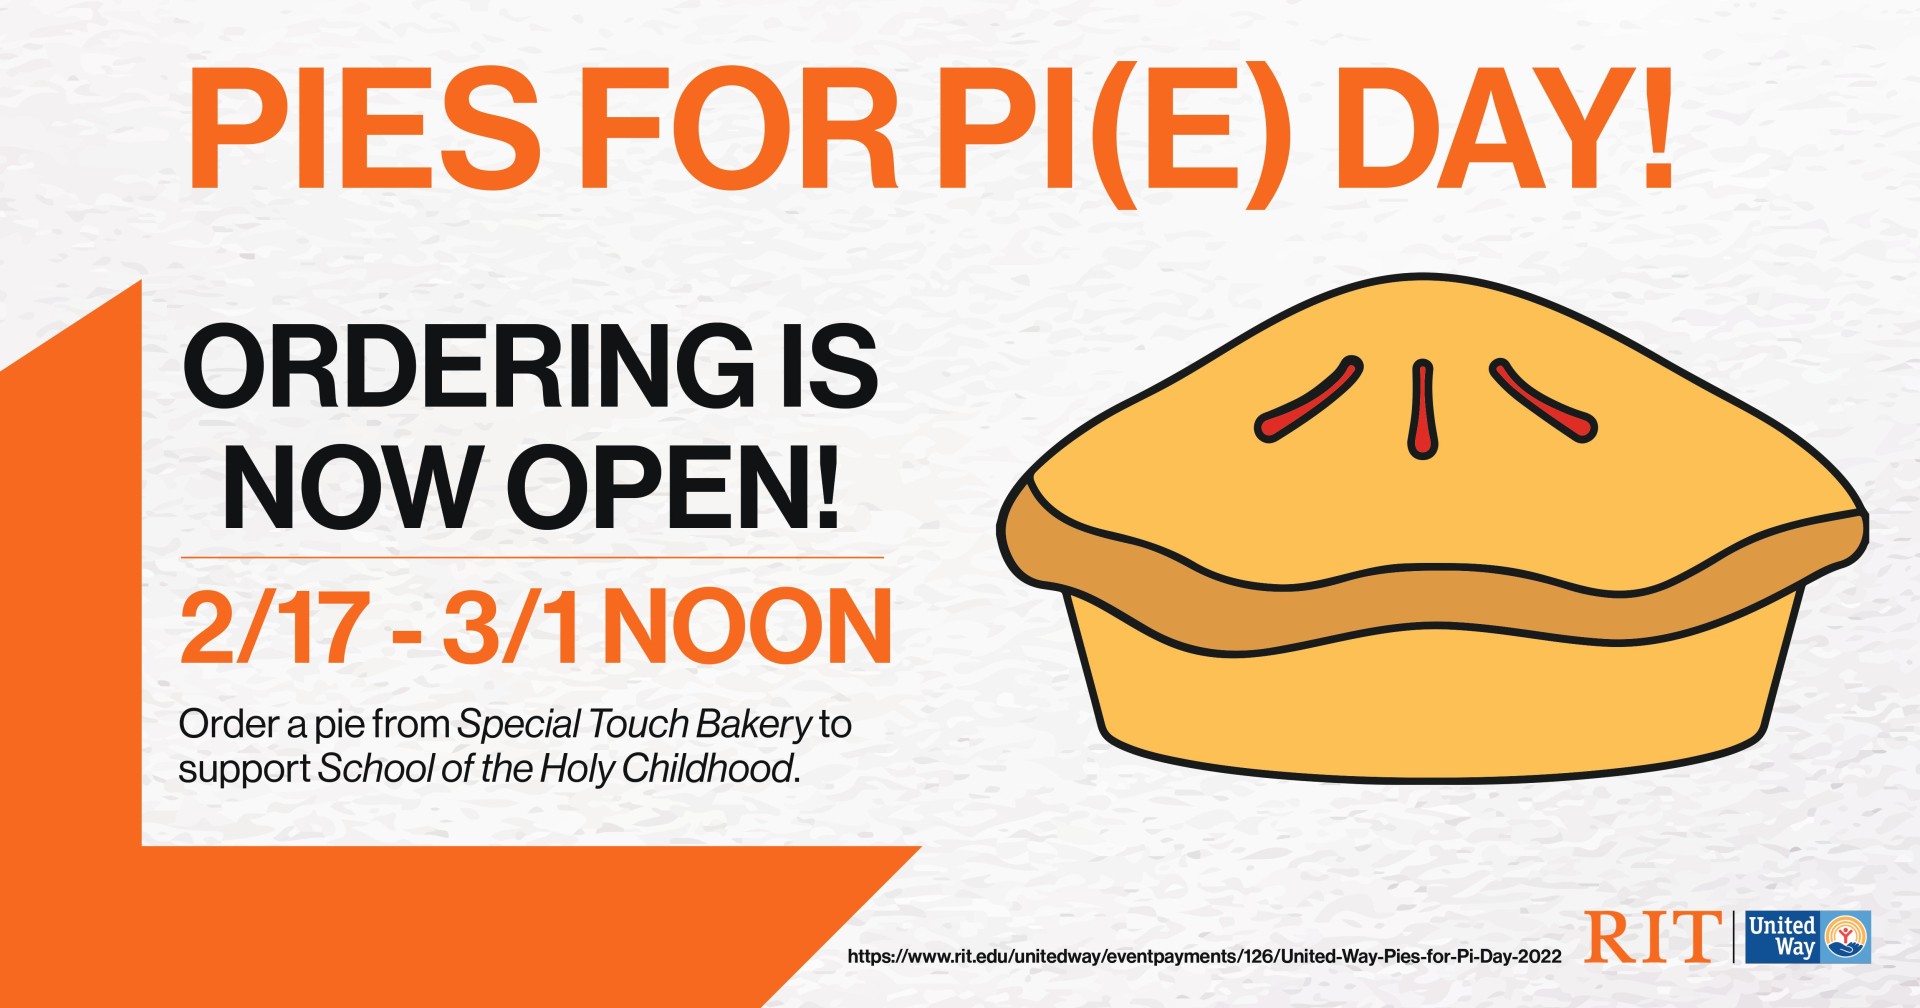 Text on Image "Pies for Pi Day Ordering is Now Open 2/17 to 3/1 noon Order a pie from Special Touch Bakery to support the school of the holy childhood." On the right side of the image is an image of a baked pie. 